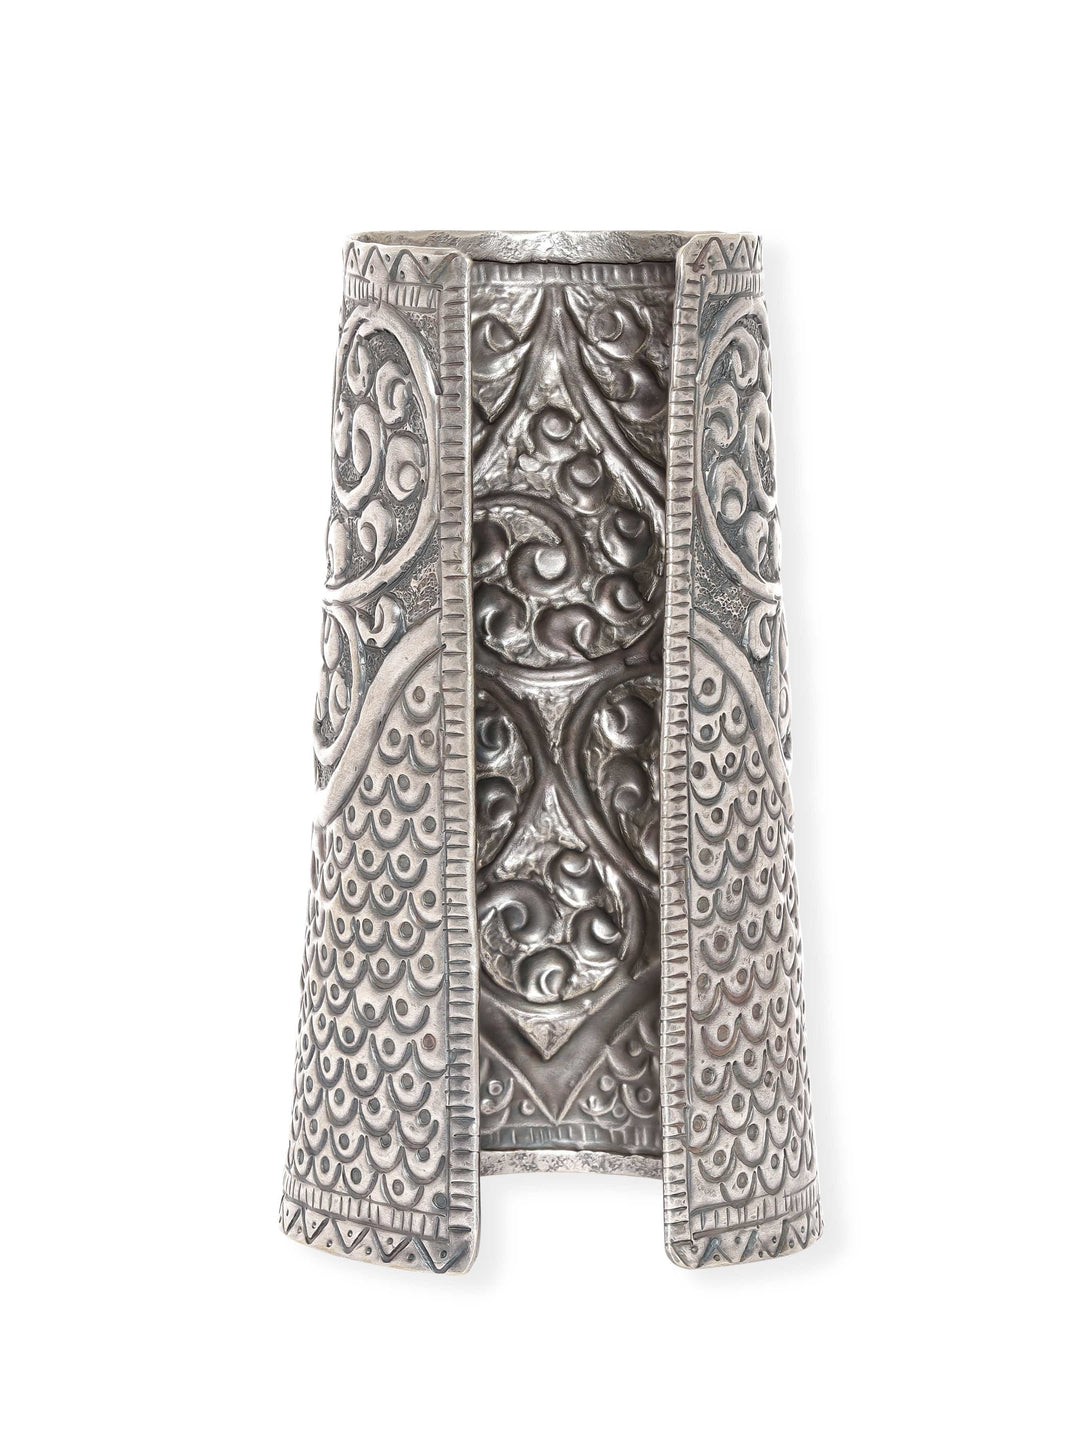 Oxidized Silver Plated embossed Handcrafted Statement Hand Cuff Bangles & Bracelets